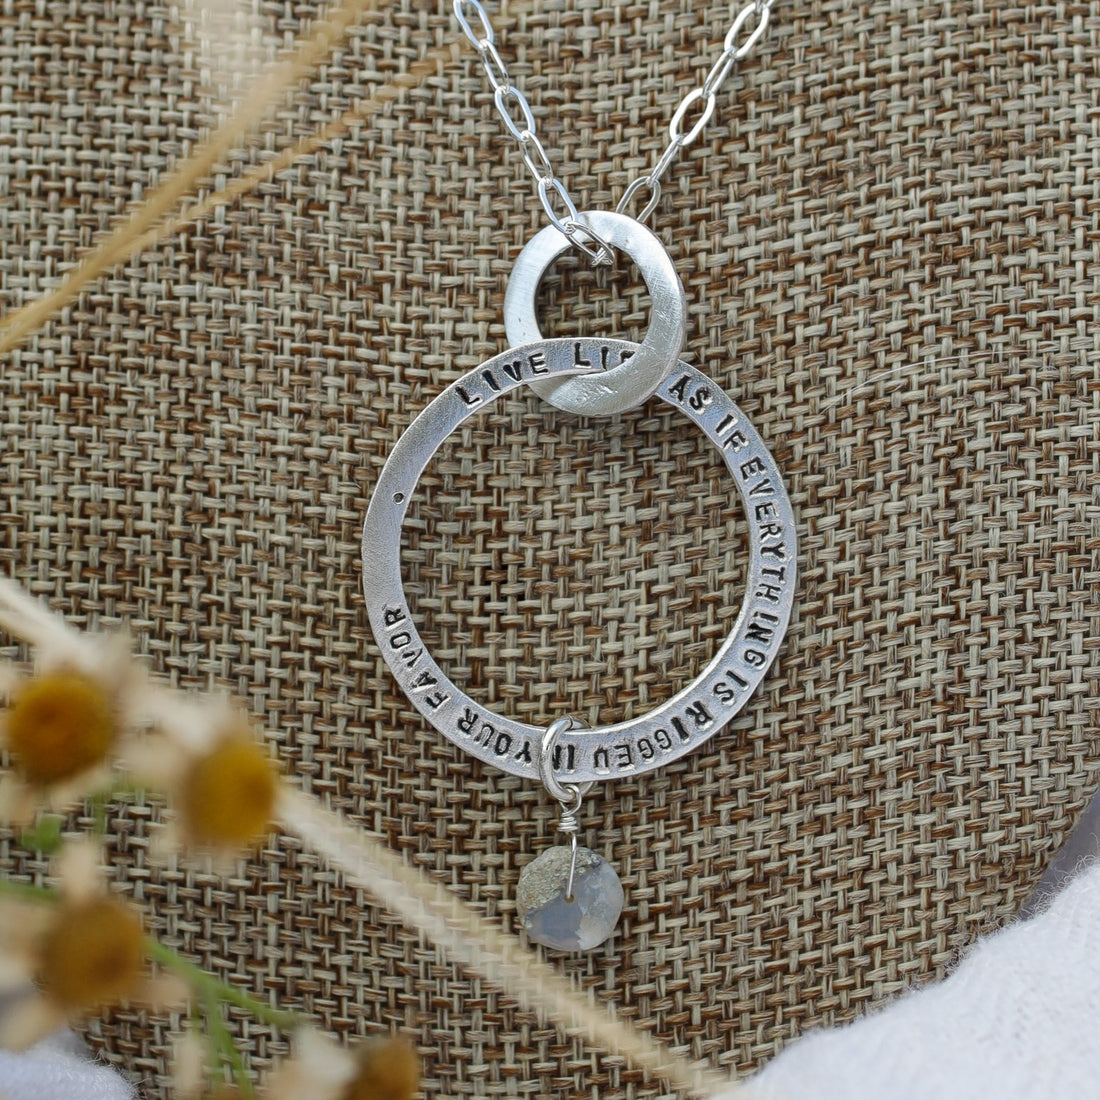 Ram Dass Message Circle Necklace - Chocolate and Steel